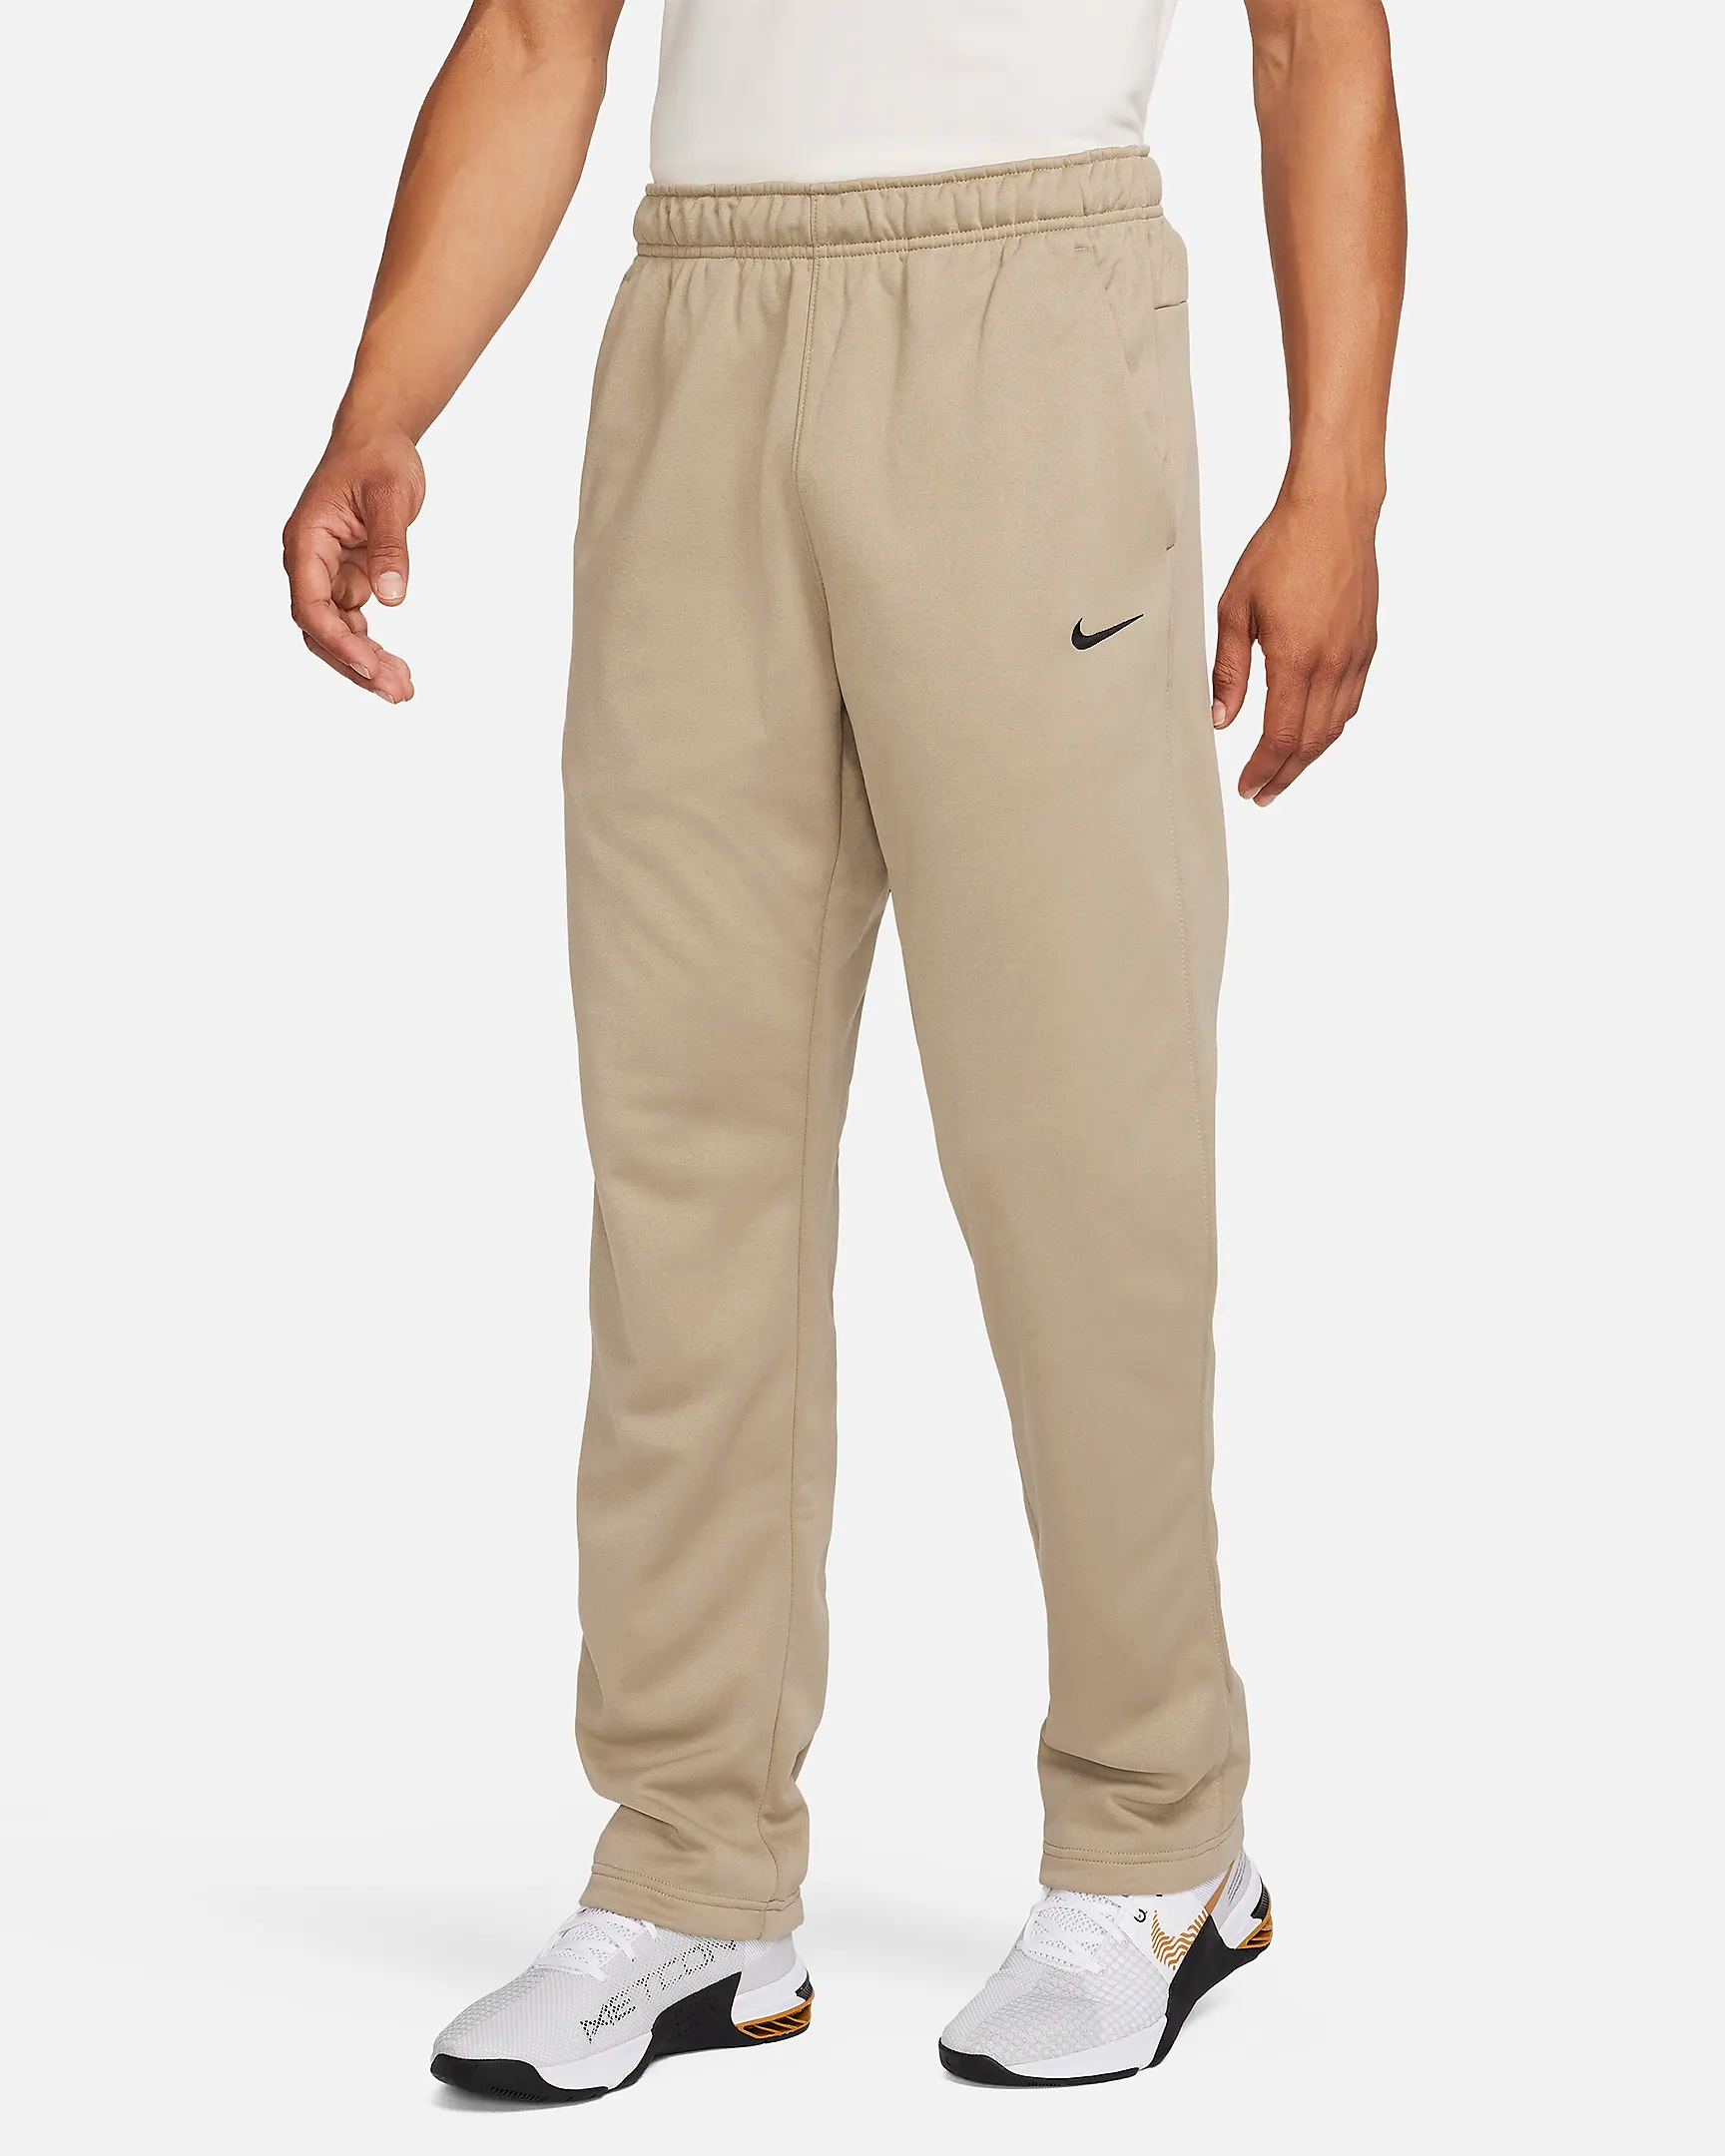 Over 50% OFF the Nike Therma Fit Open Hem Pants Khaki — Sneaker